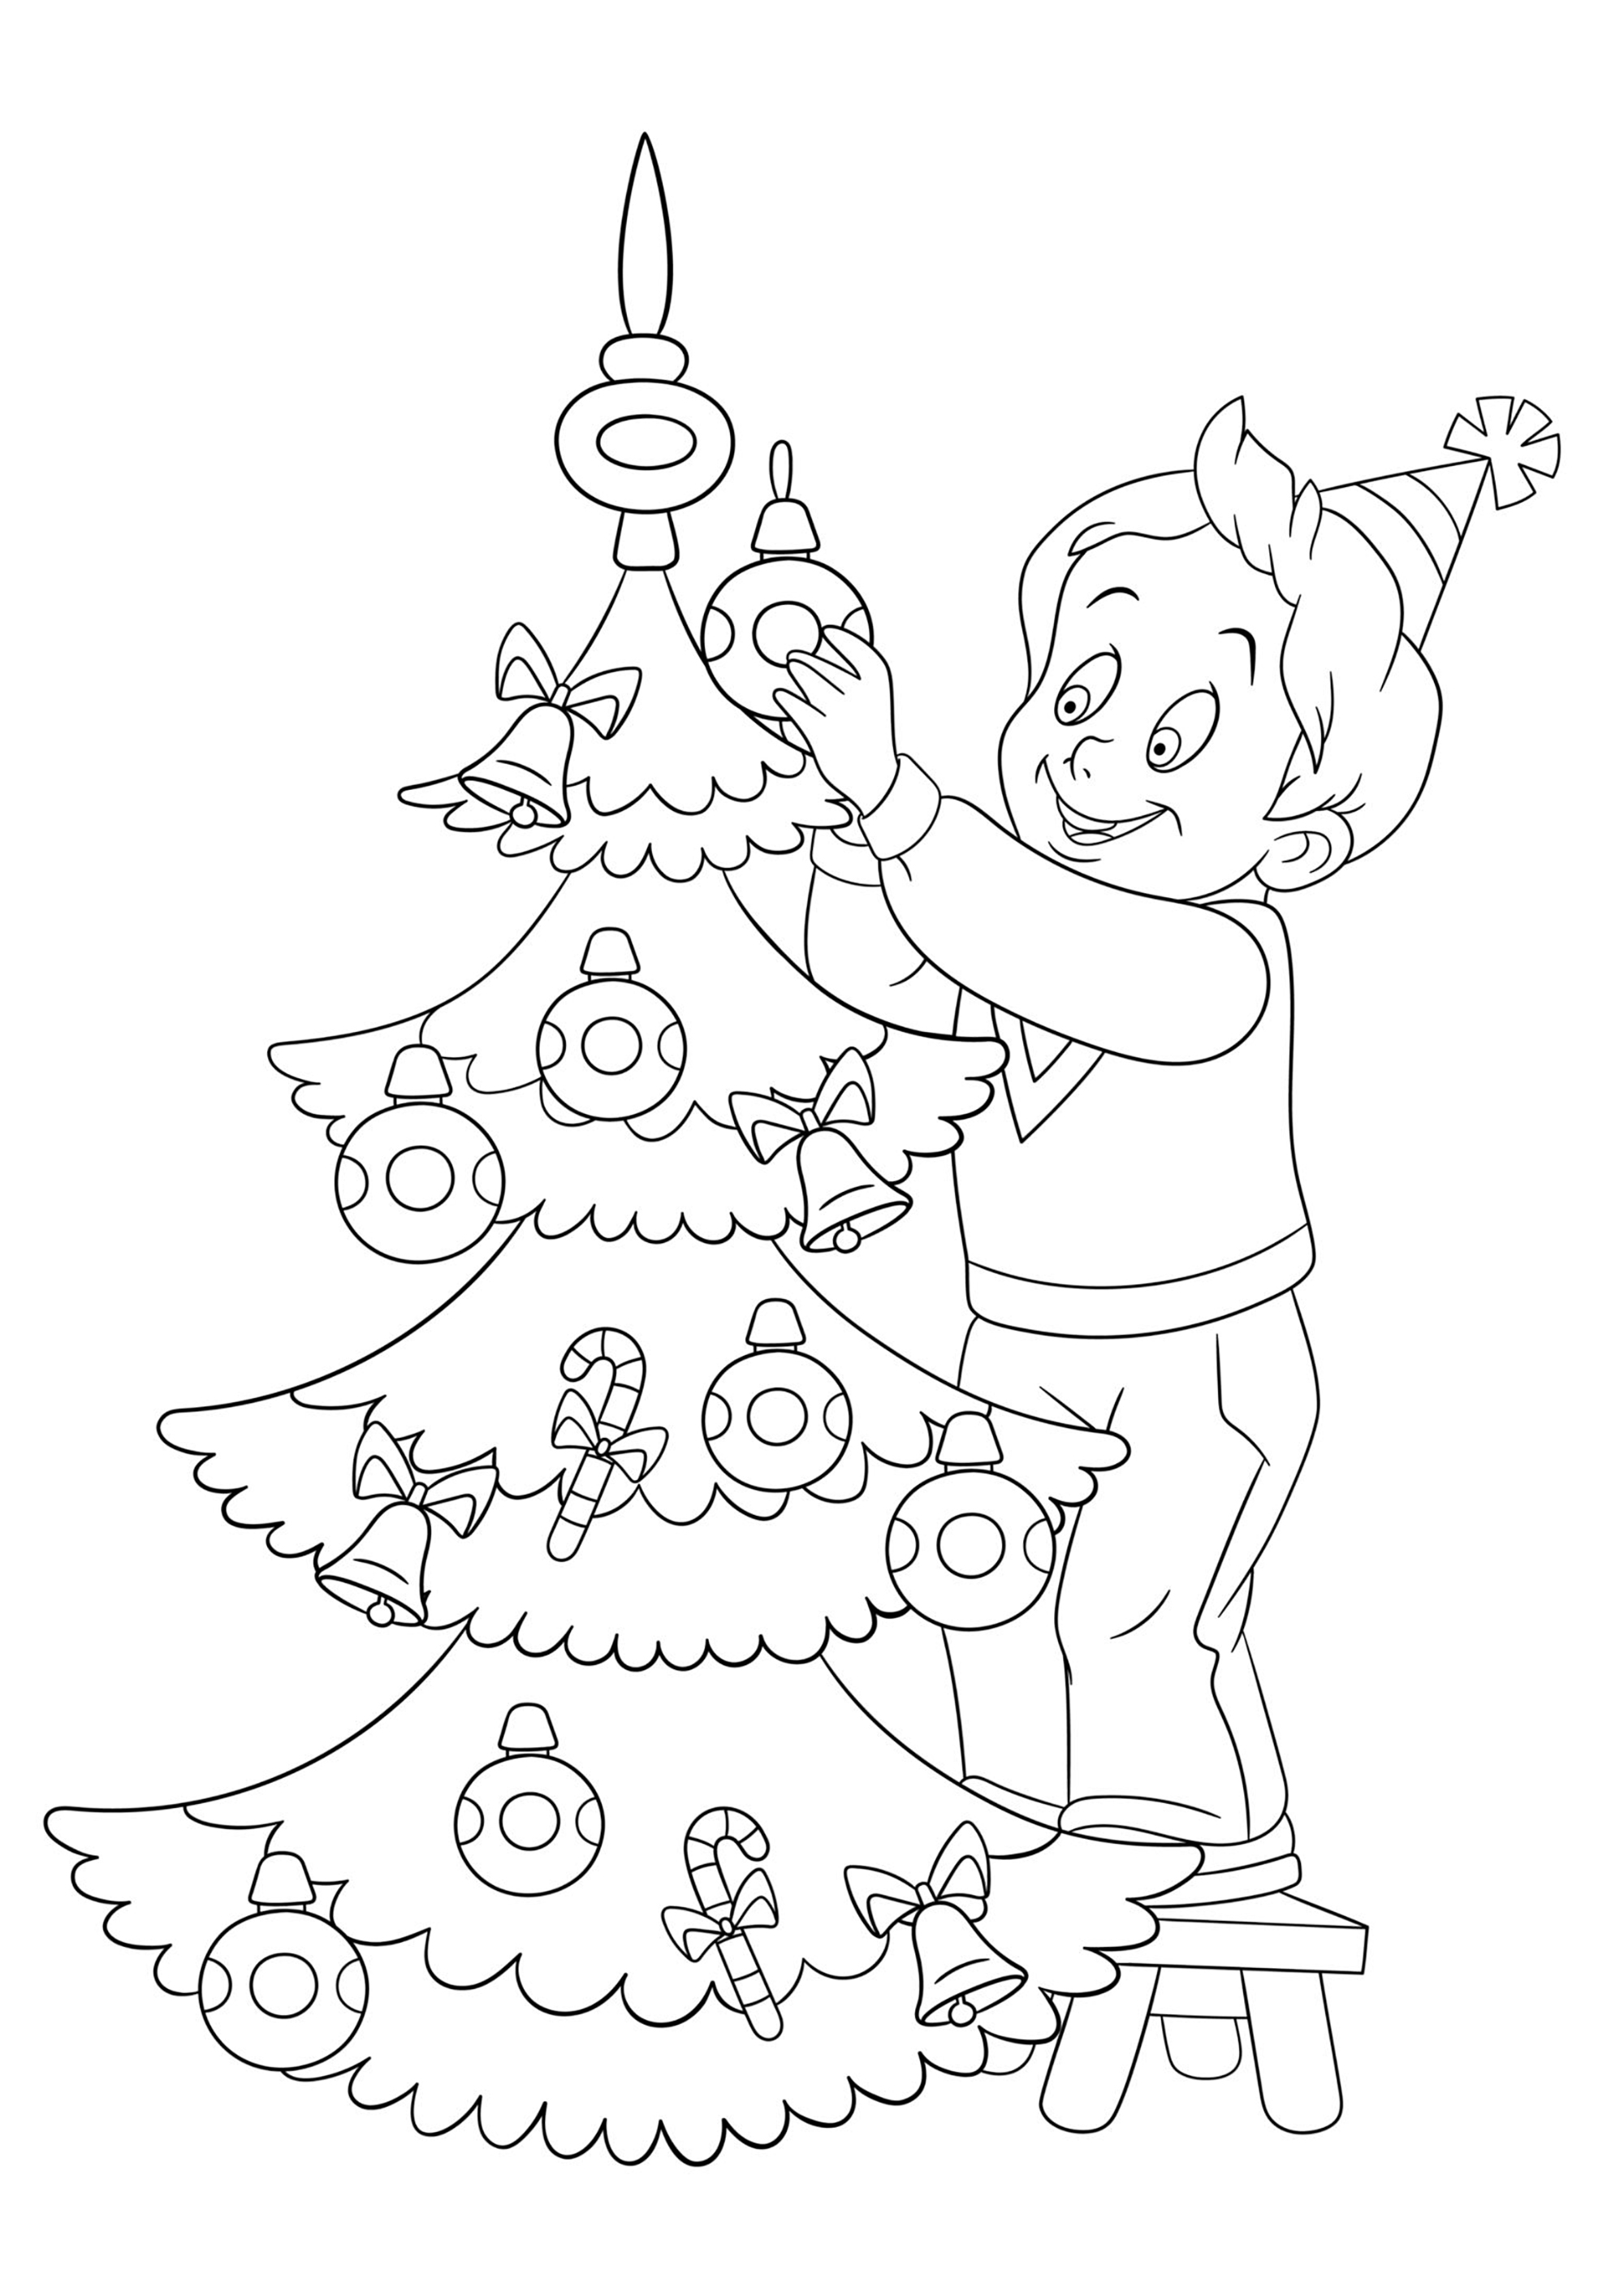 Christmas Coloring Page Images - 226+ File Include SVG PNG EPS DXF